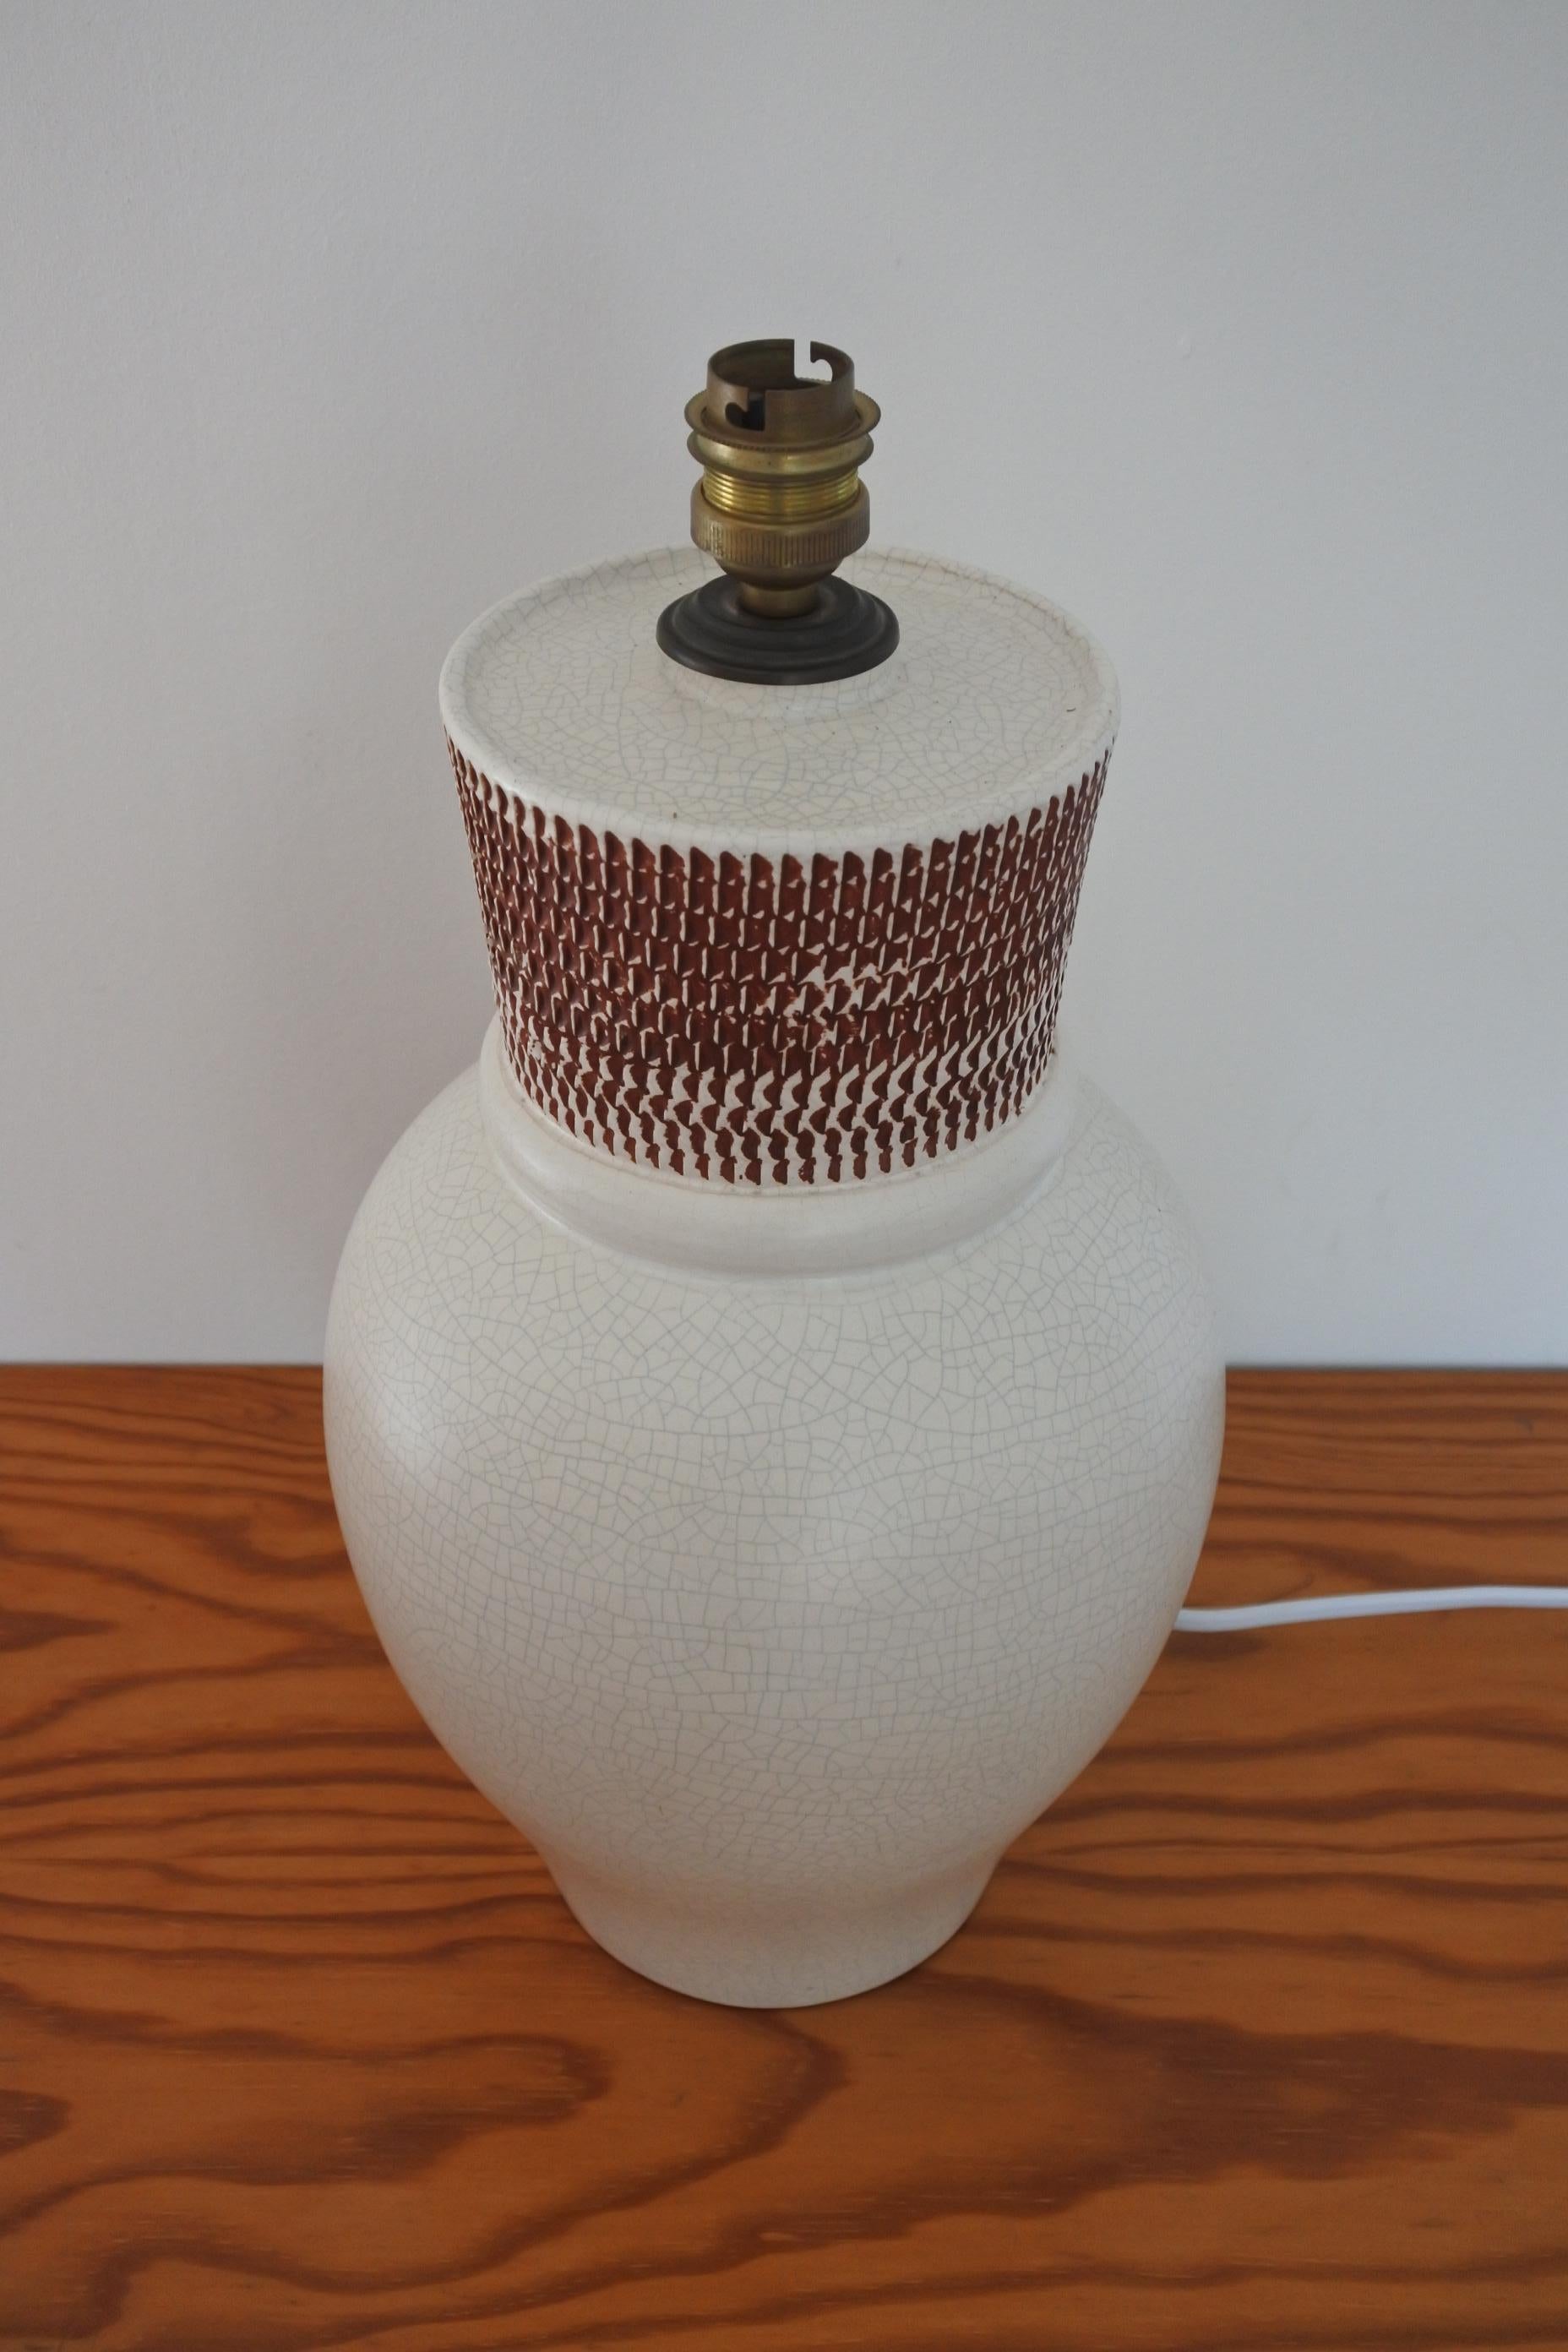 Ceramic table lamp by french artist Pol Chambost.
White mat crackled glaze with a burgundy scarified circular decor on top,
circa 1940.
Marked with one of Pol Chambost's documented 